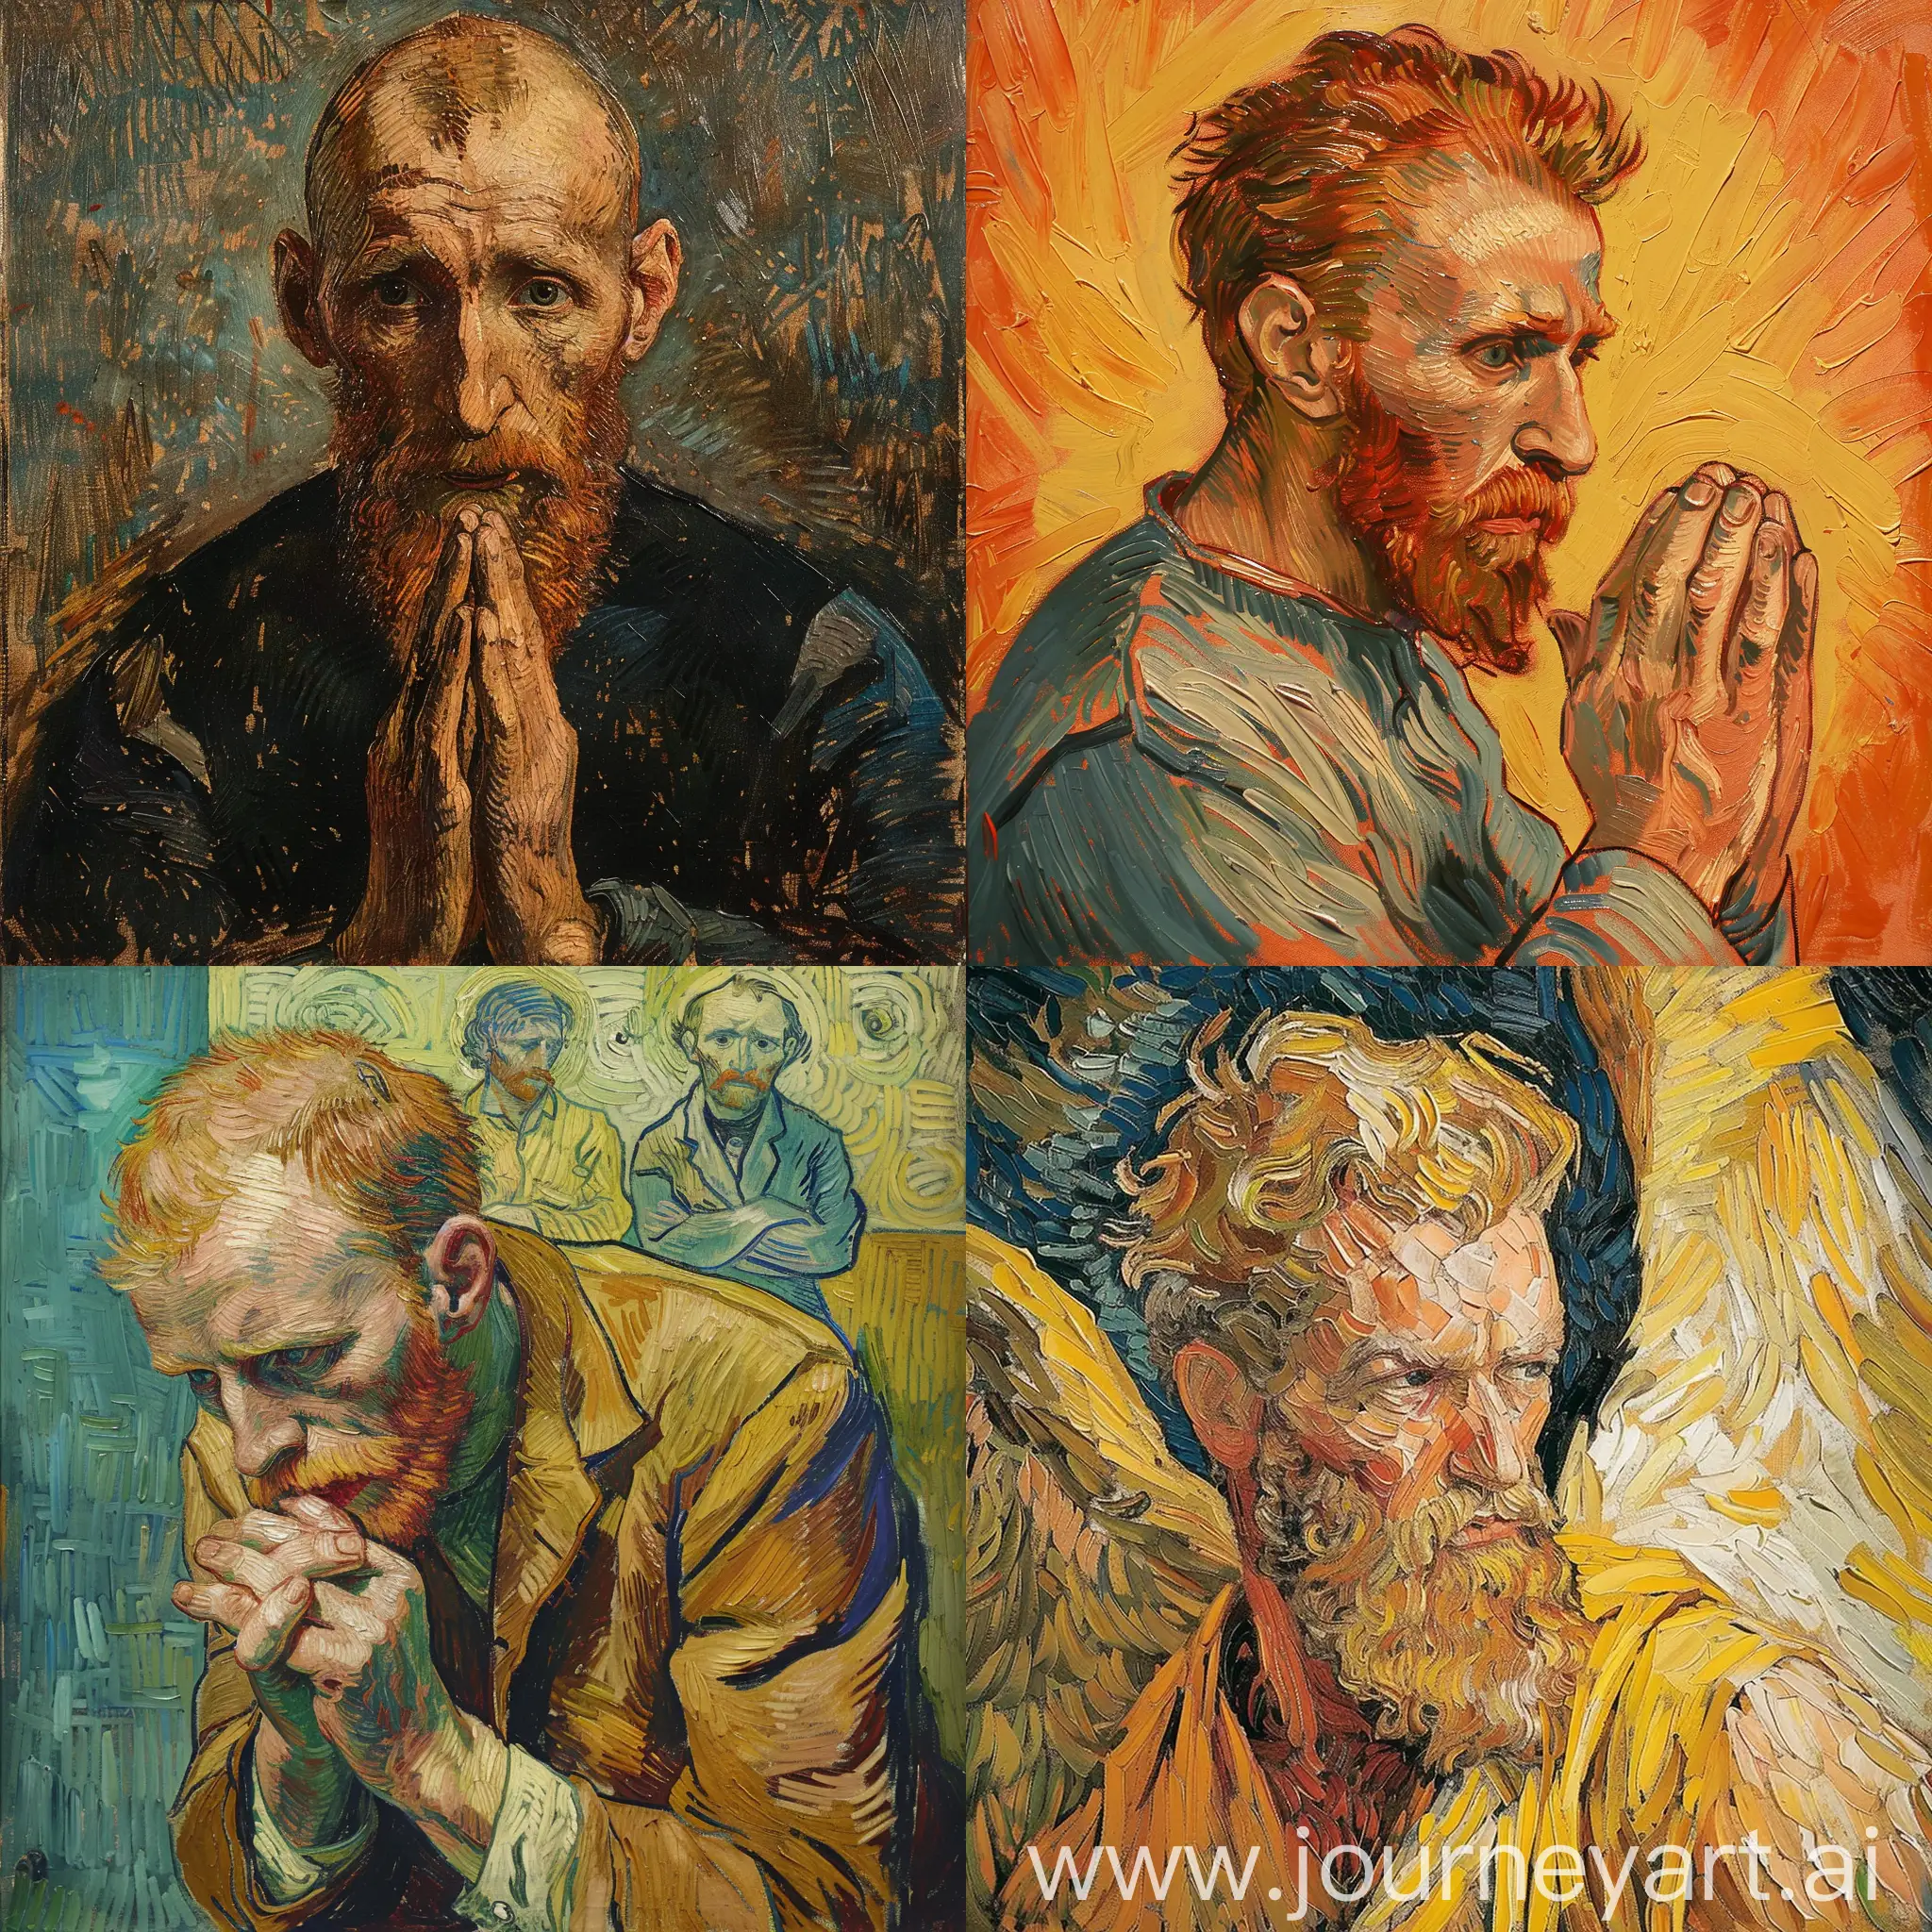 Divine-Fusion-Van-Gogh-and-Picassoinspired-Realistic-God-Painting